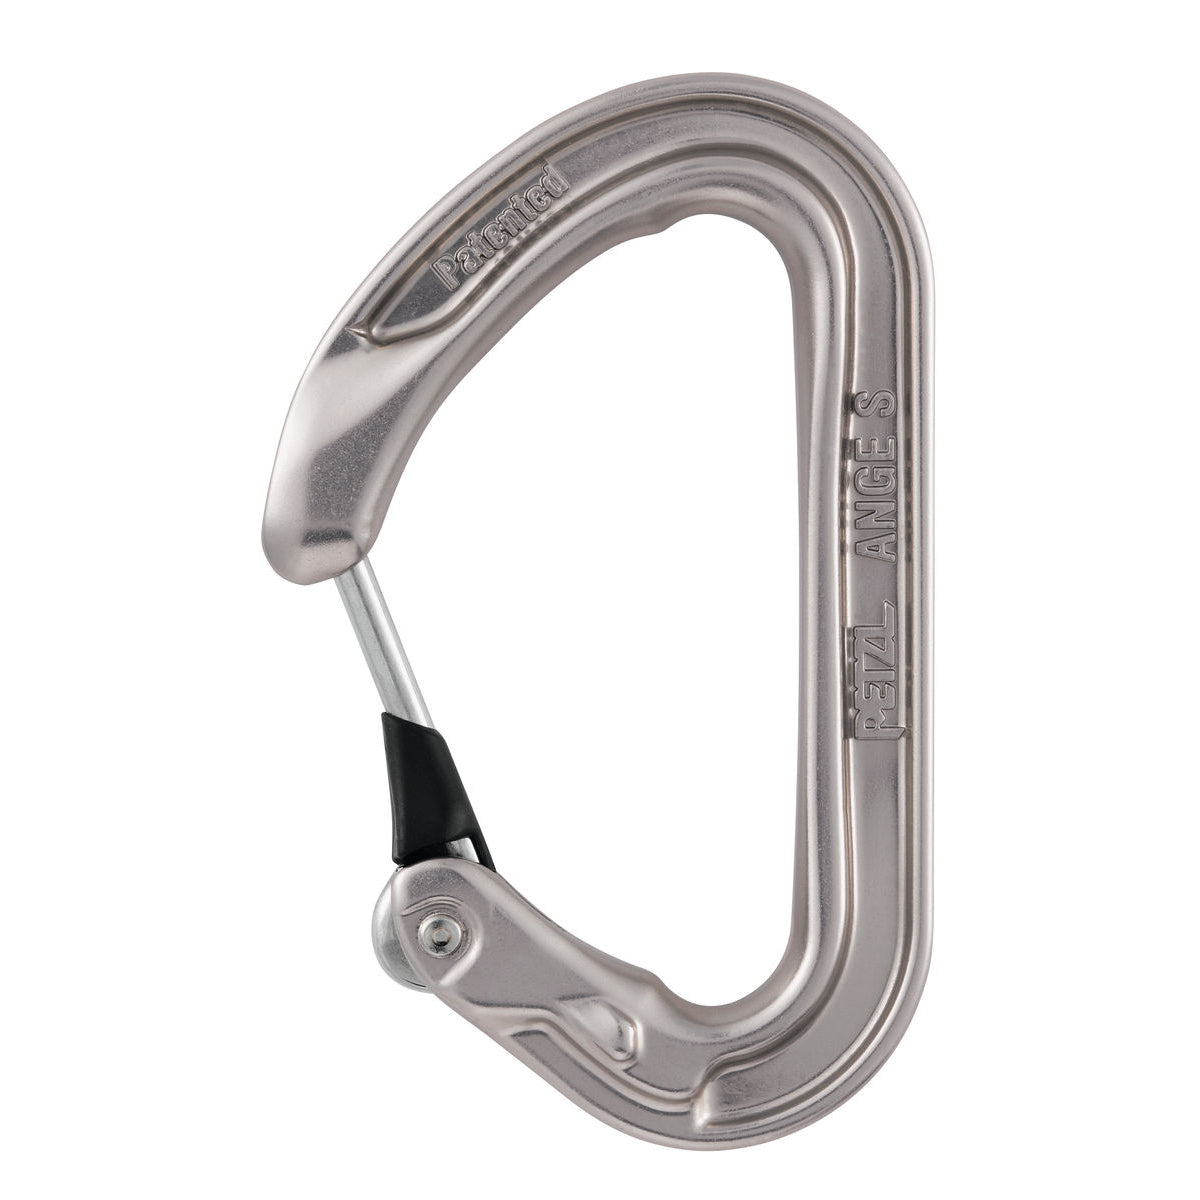 Petzl ANGE S climbing carabiner in silver colour, with silver gate closed